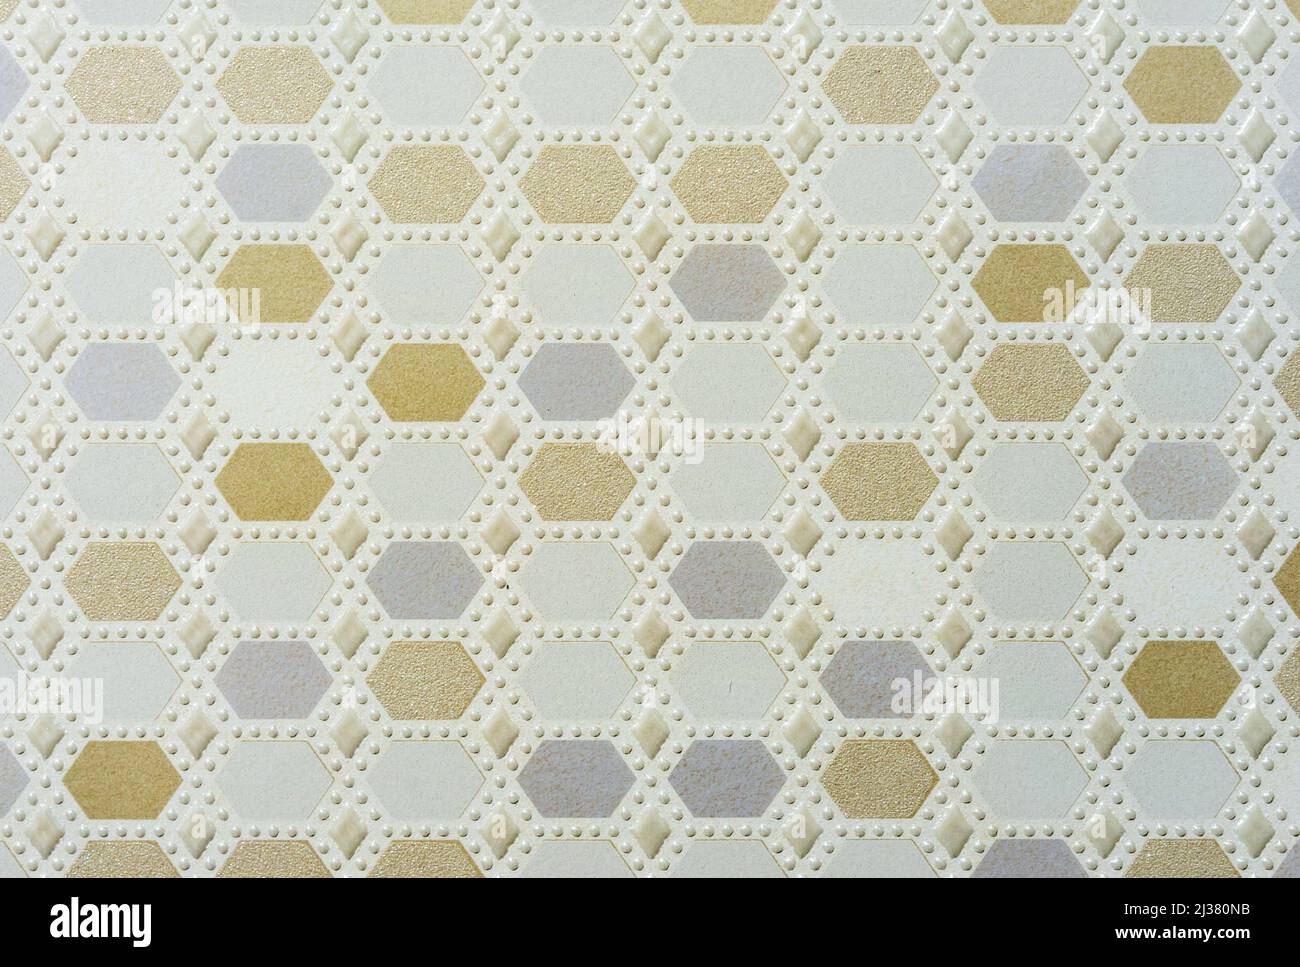 Ceramic tiles with yellow and blue geometric shapes and voluminous white dots. Stock Photo